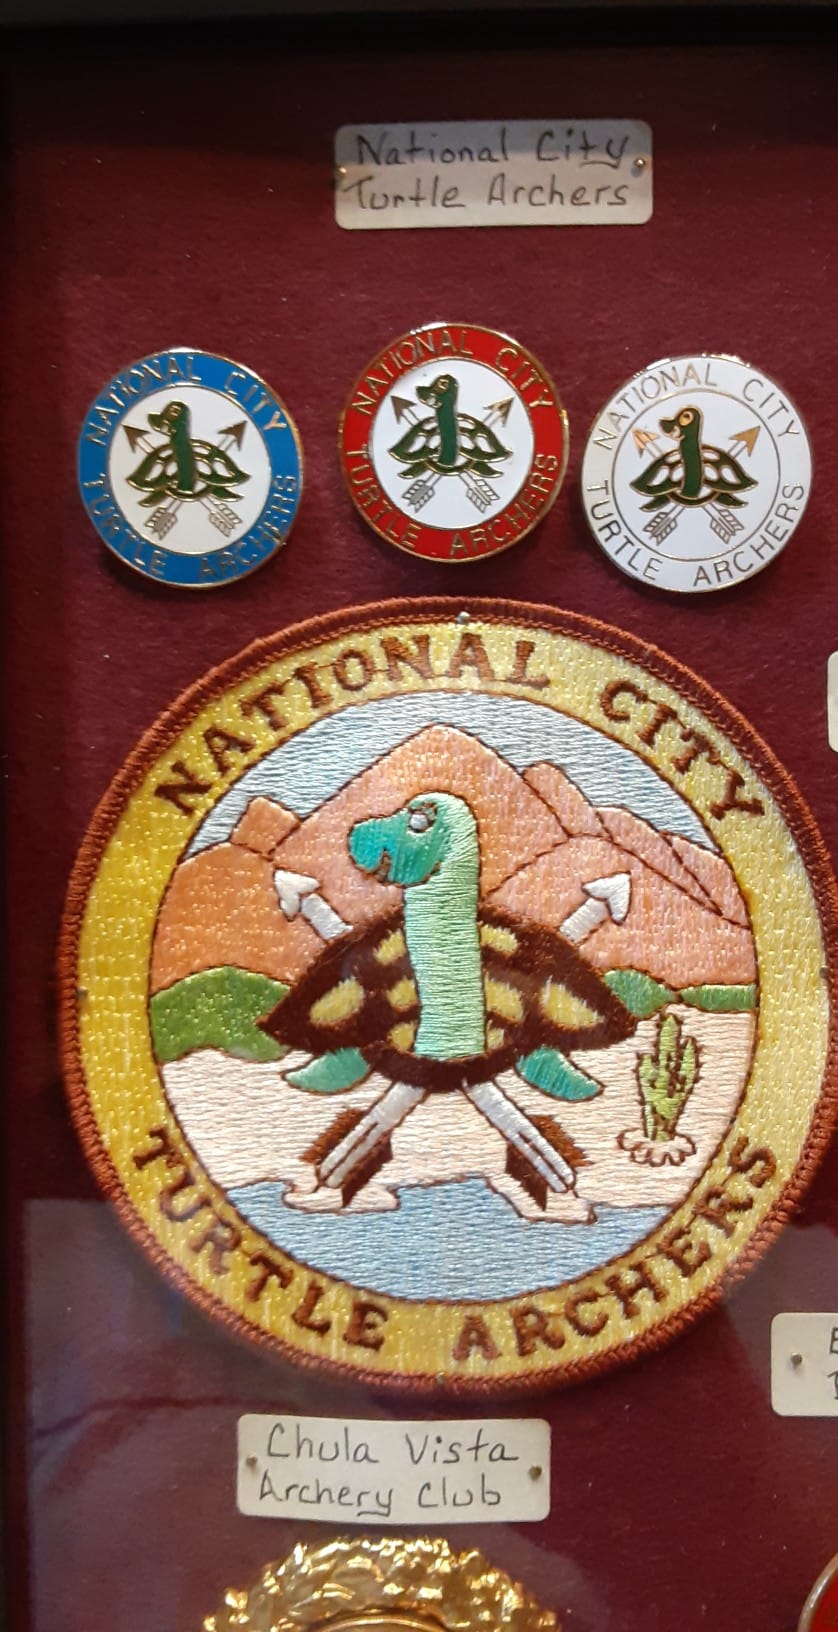 National City Turtle Archers pins and patch